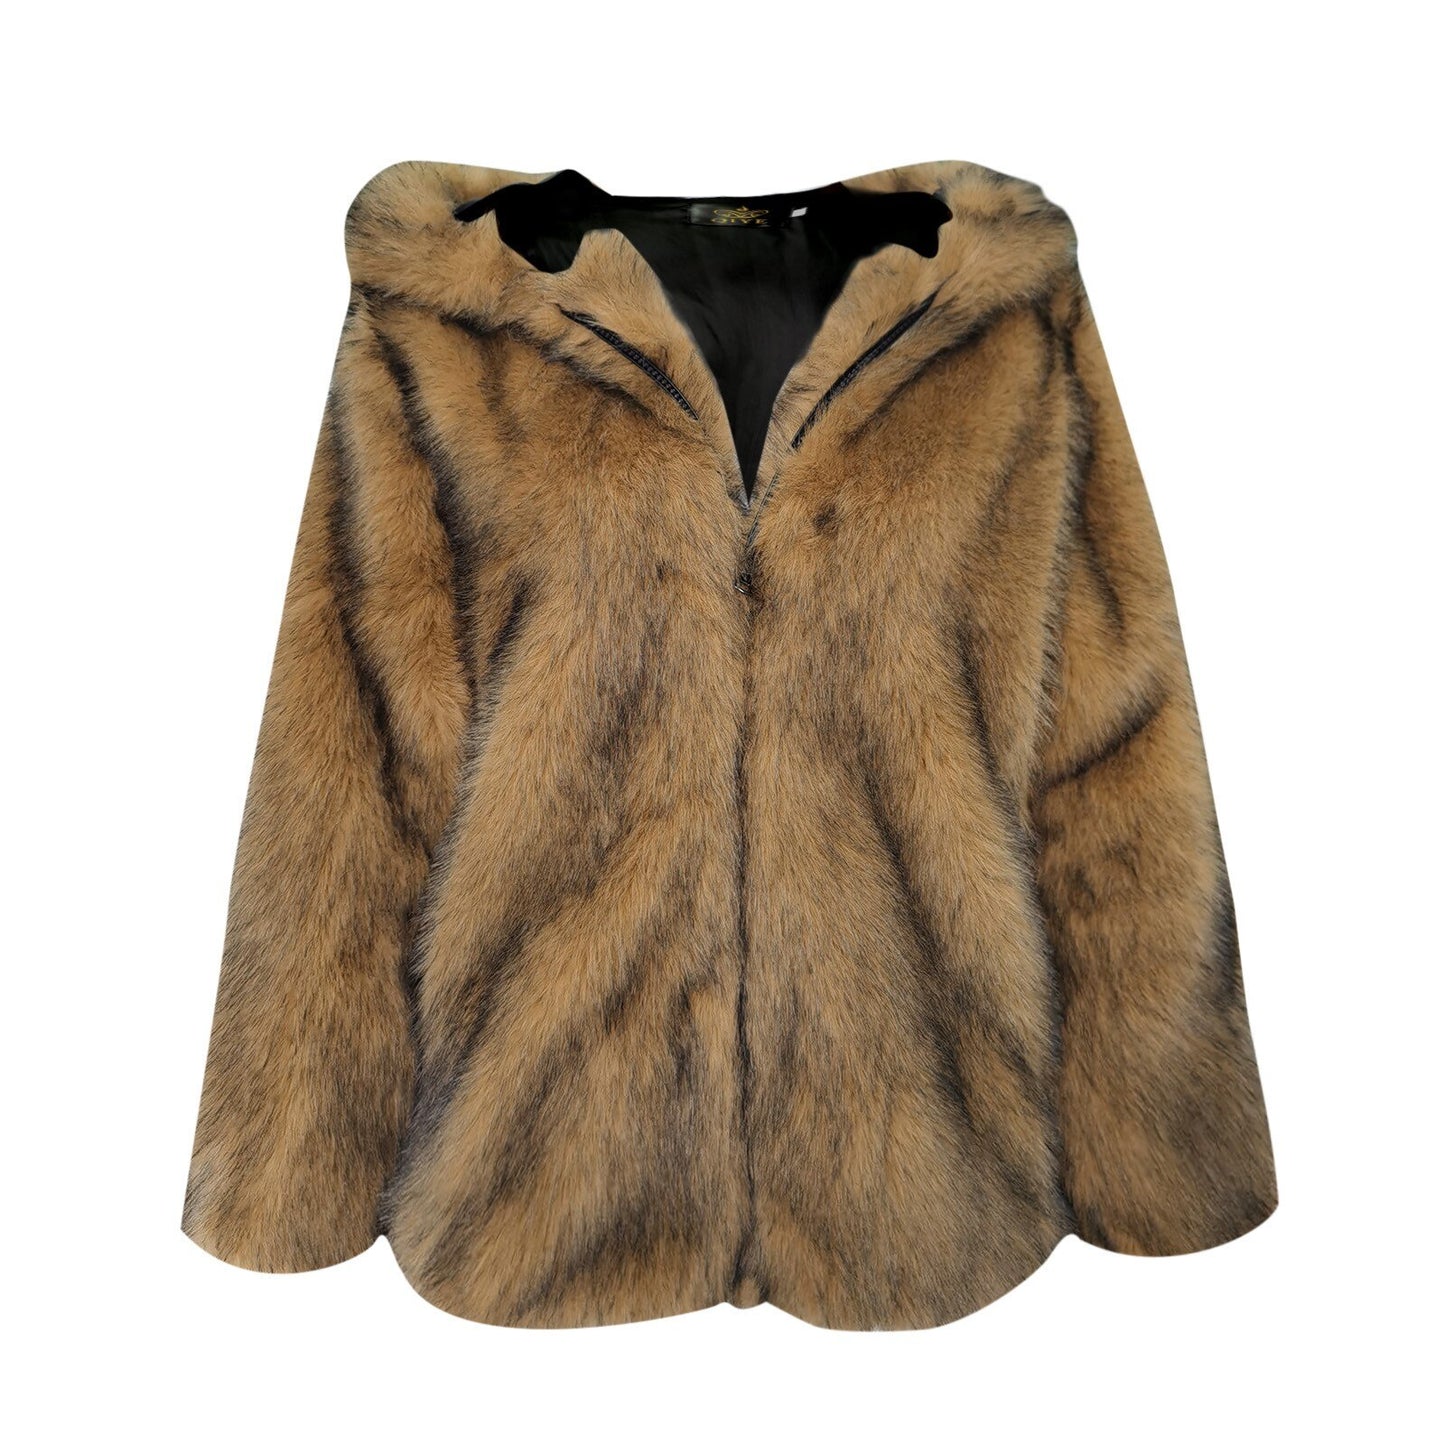 Hooded High Quality Faux Fur Top Coat